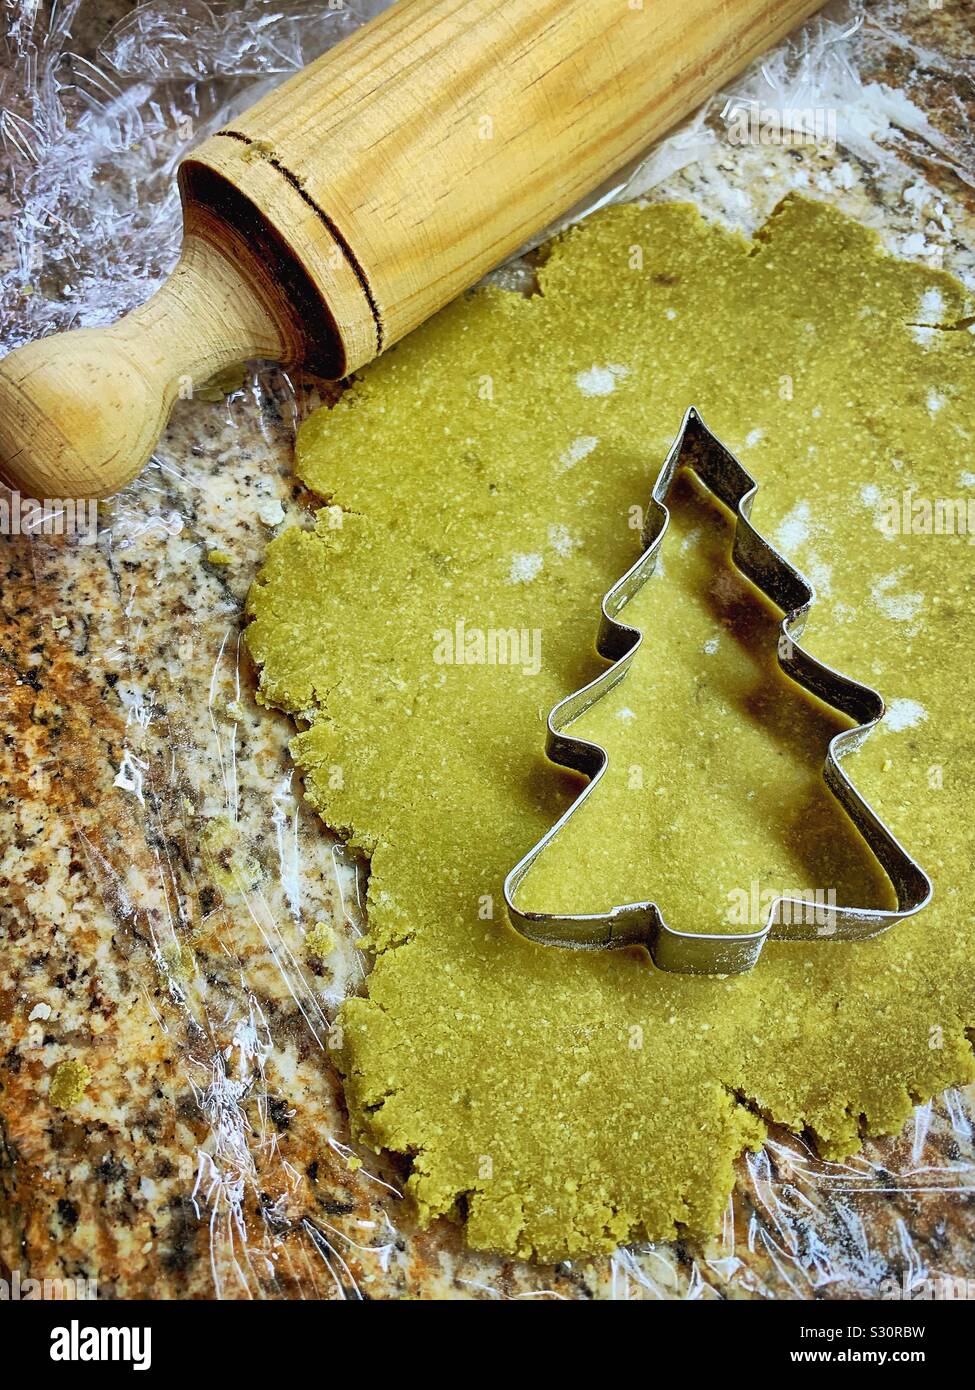 Green matcha cookie dough is rolled out and ready to be cut into Christmas tree shapes with a cookie cutter. Stock Photo